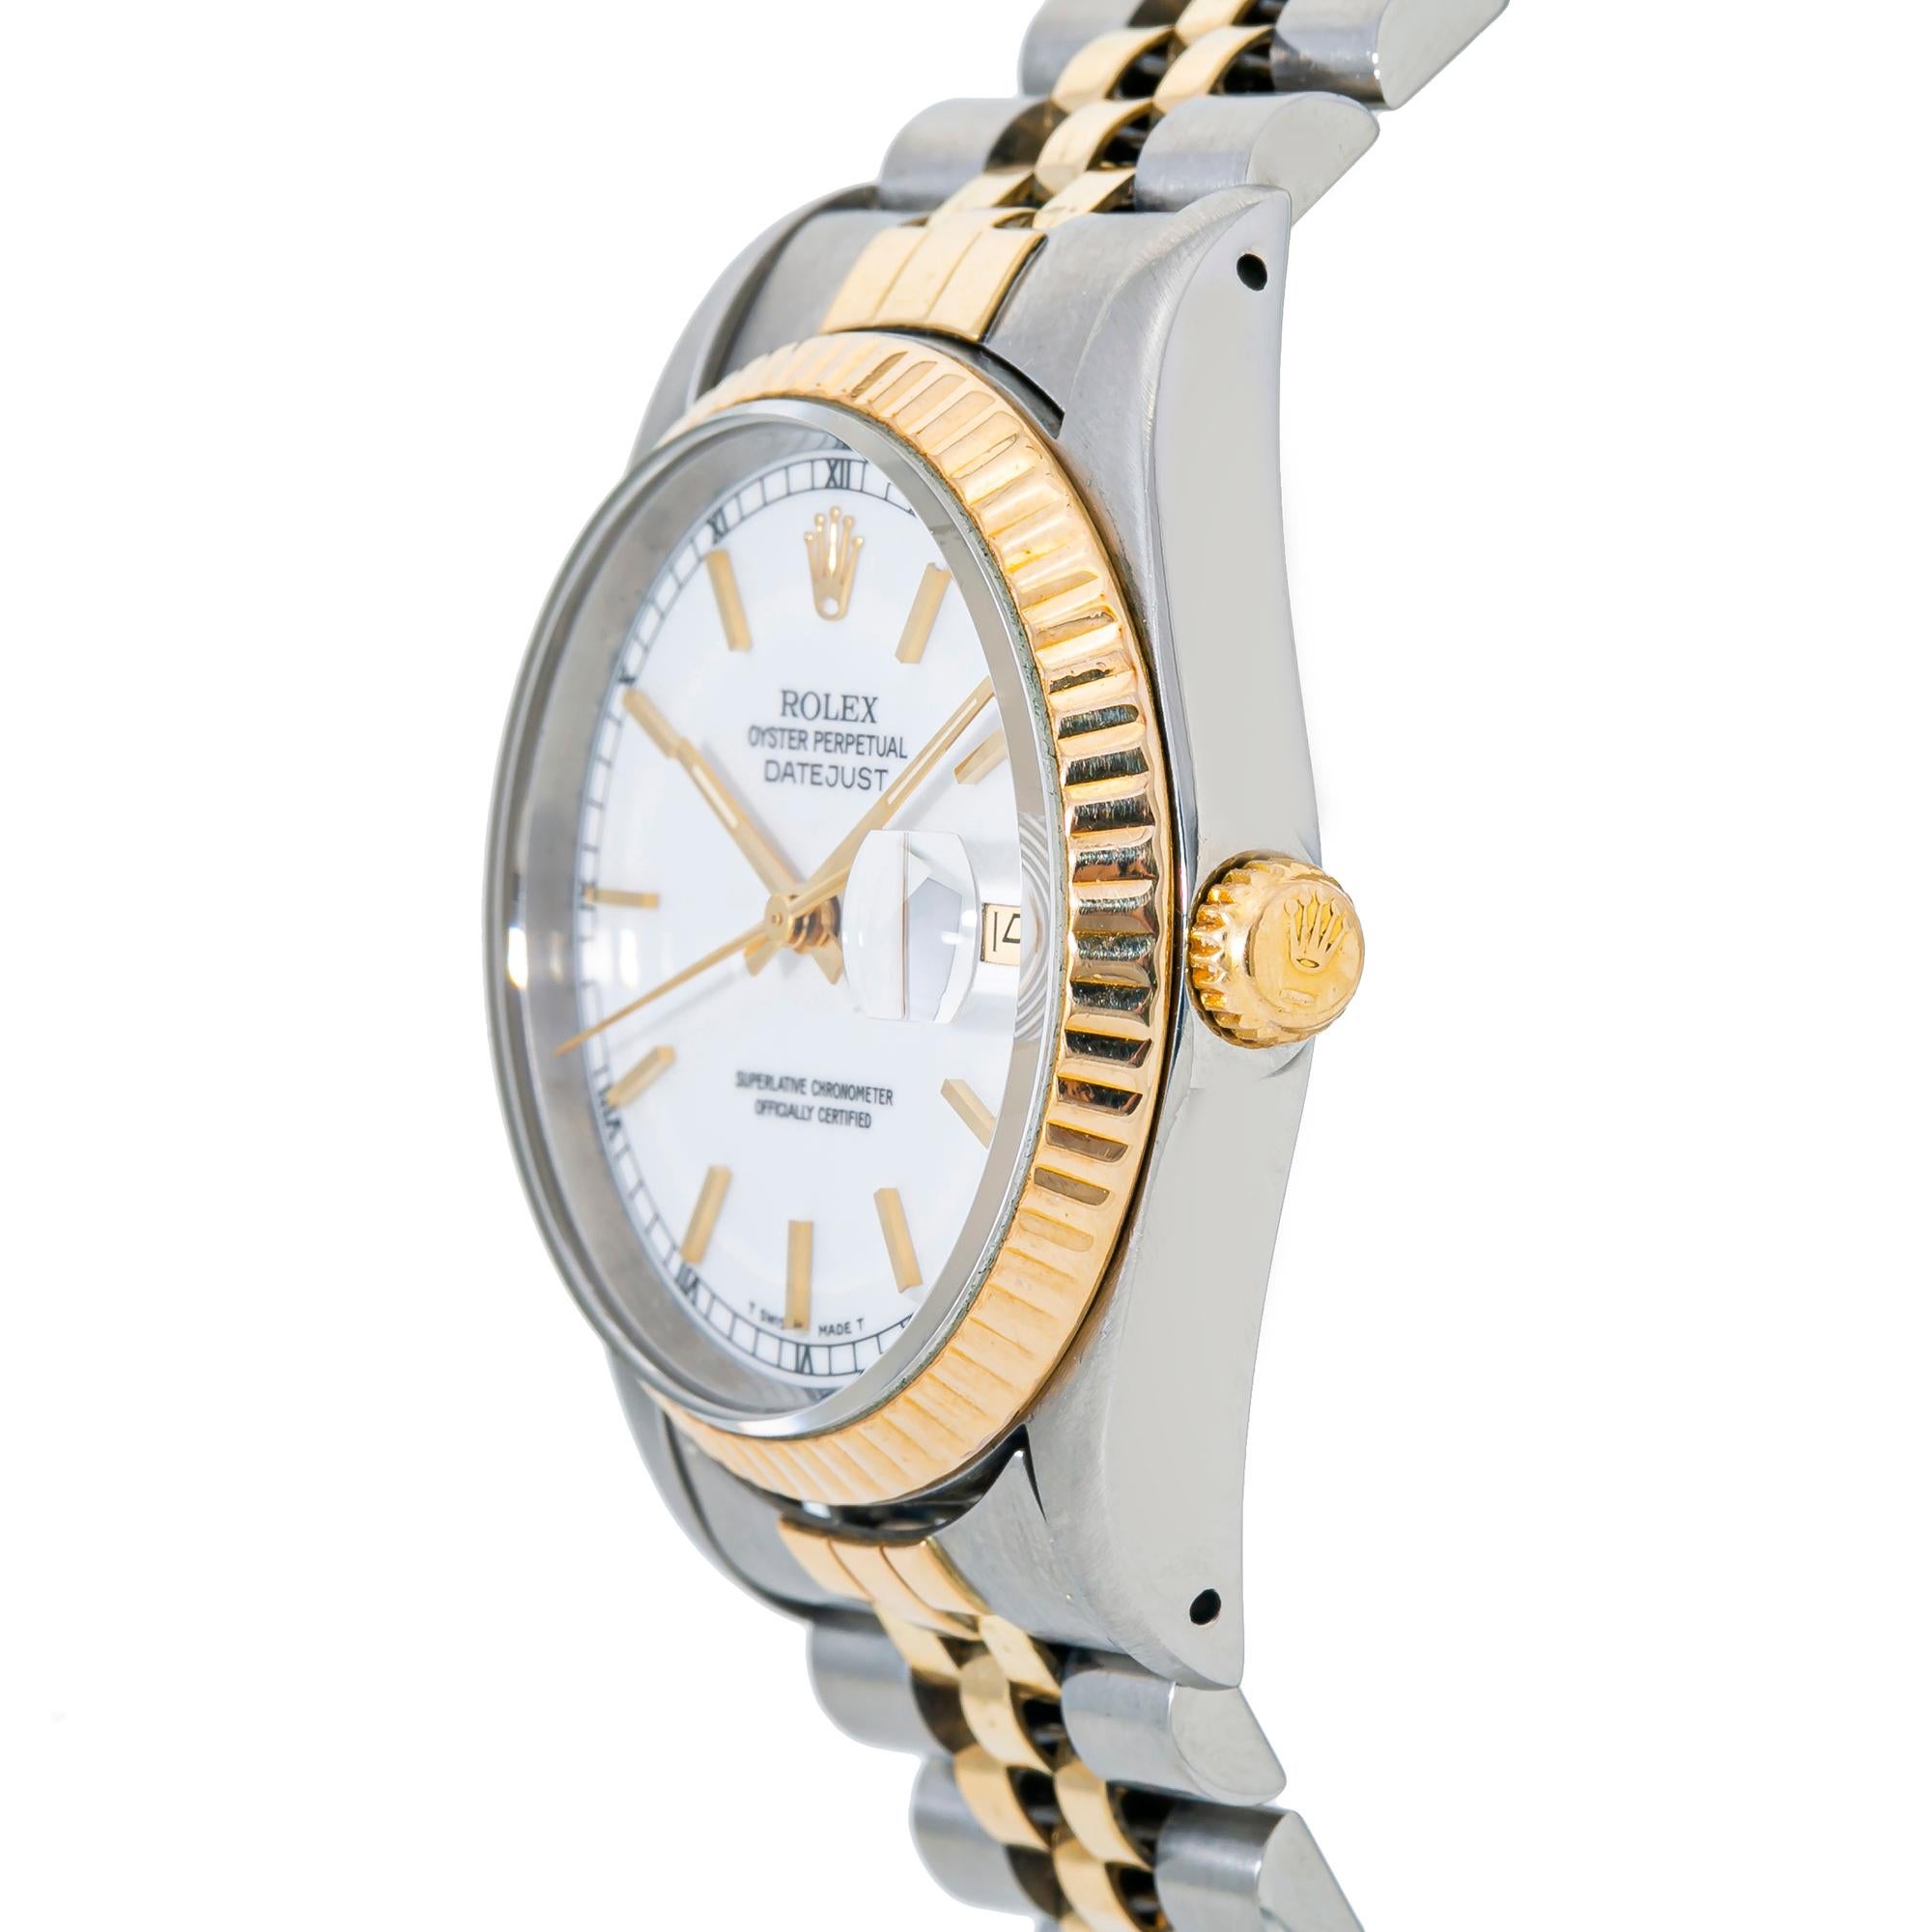 Contemporary Rolex Datejust Jubilee 16233 2-Tone 18K Yellow Gold White Dial